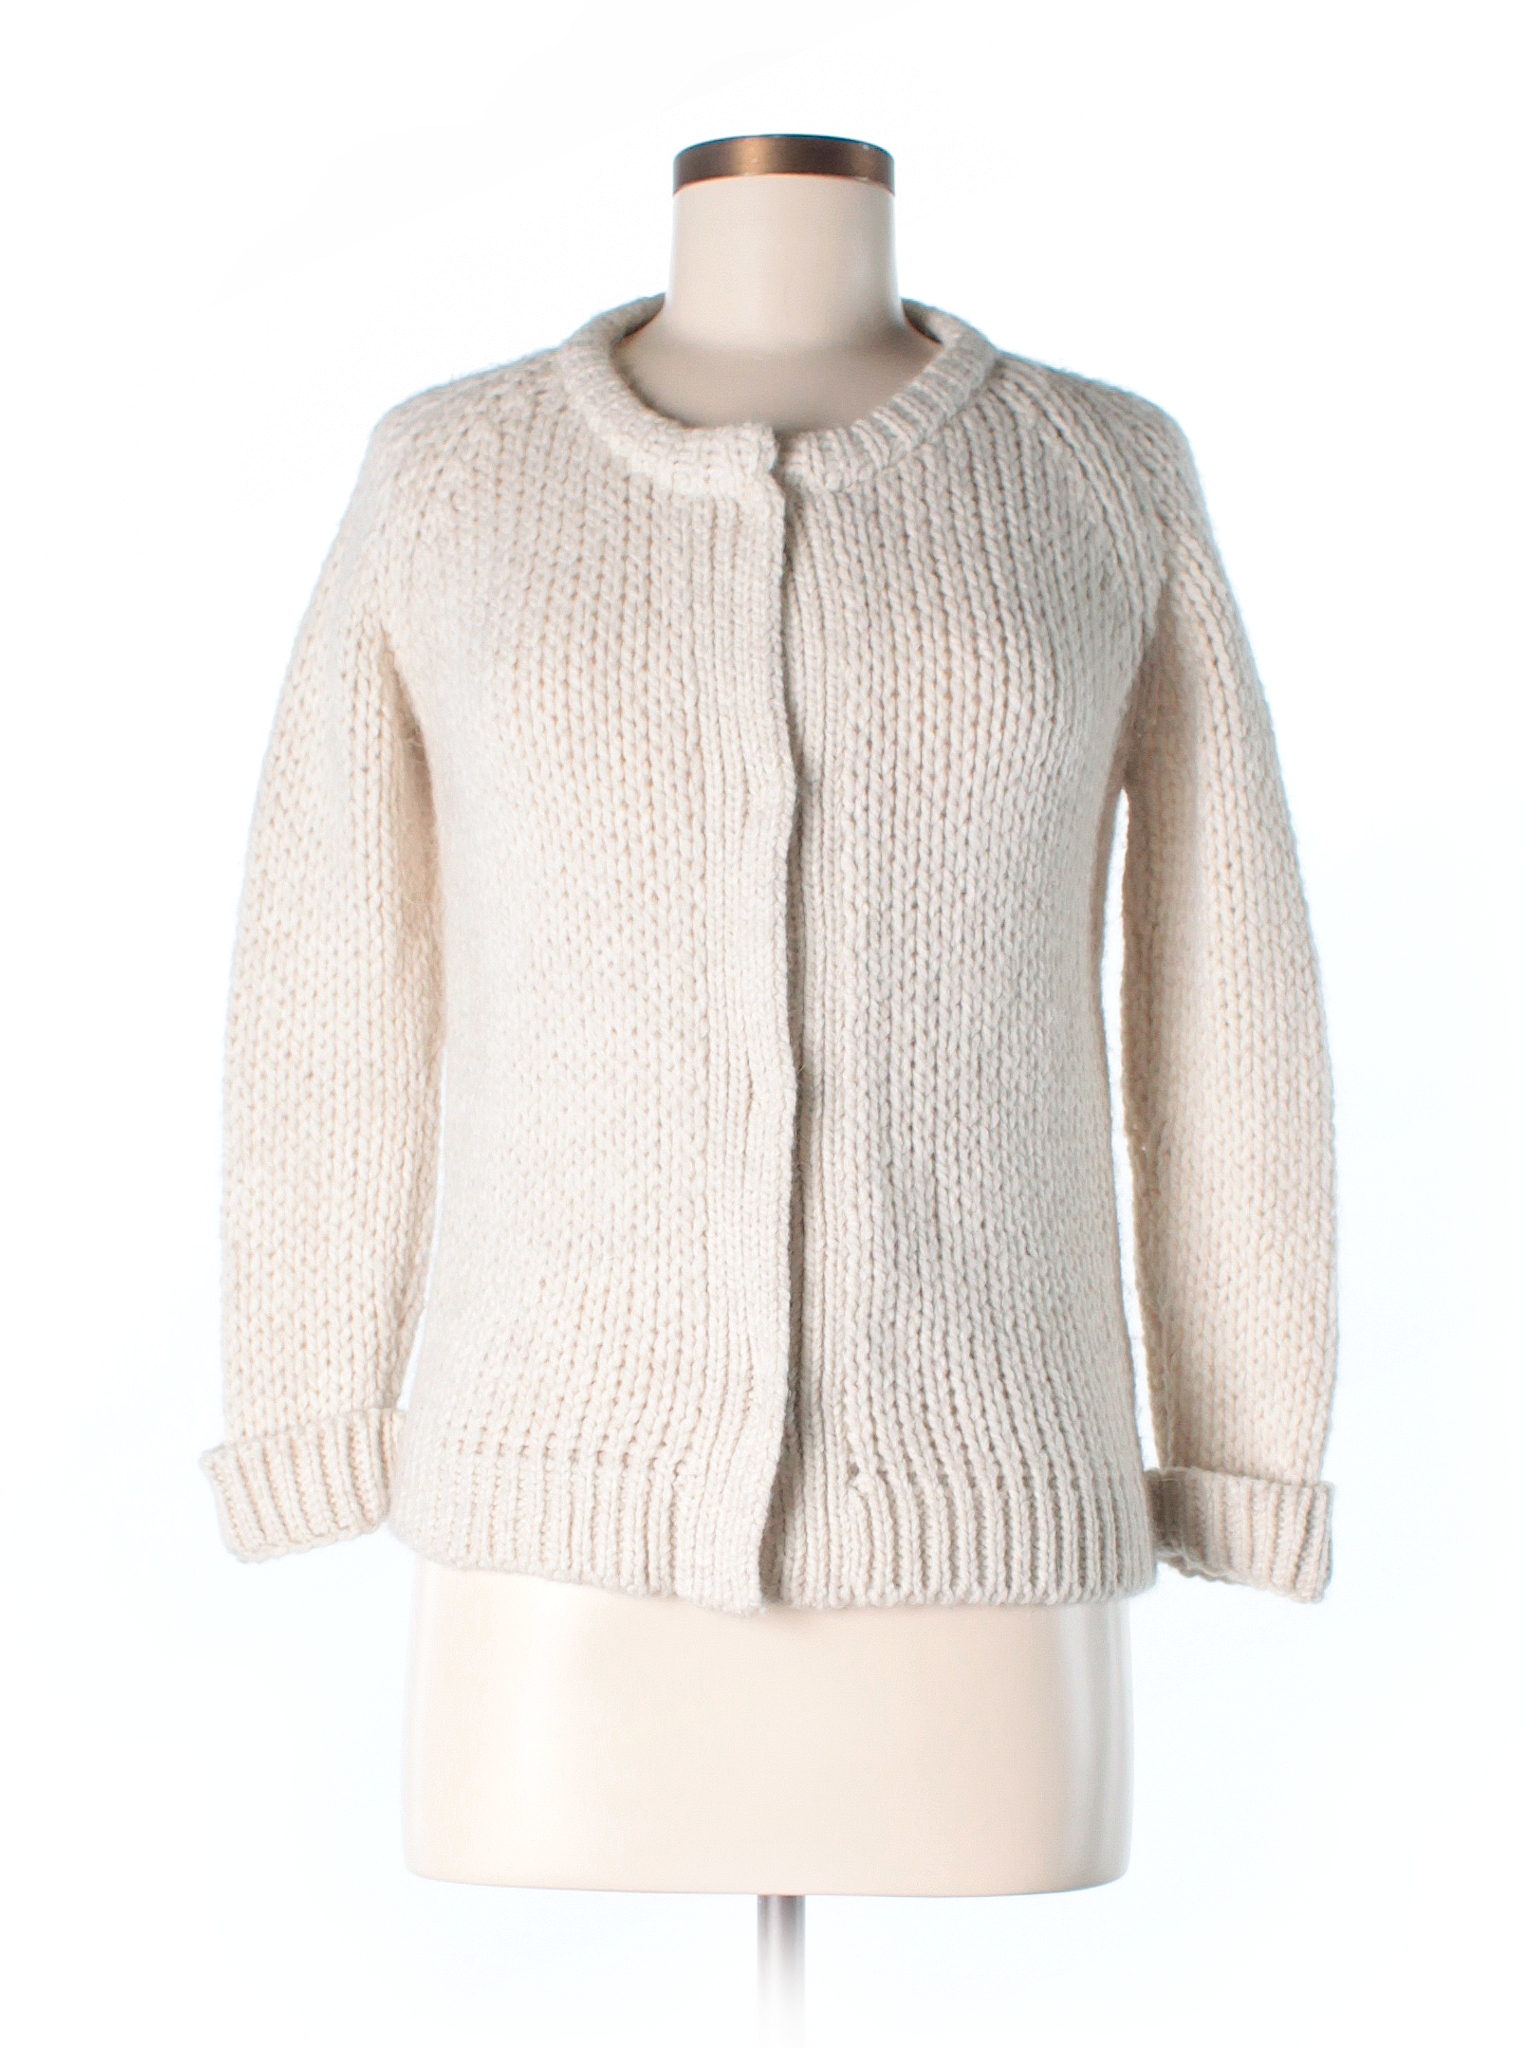 Object Without Meaning 100% Acrylic Solid Beige Cardigan Size S - 87% ...